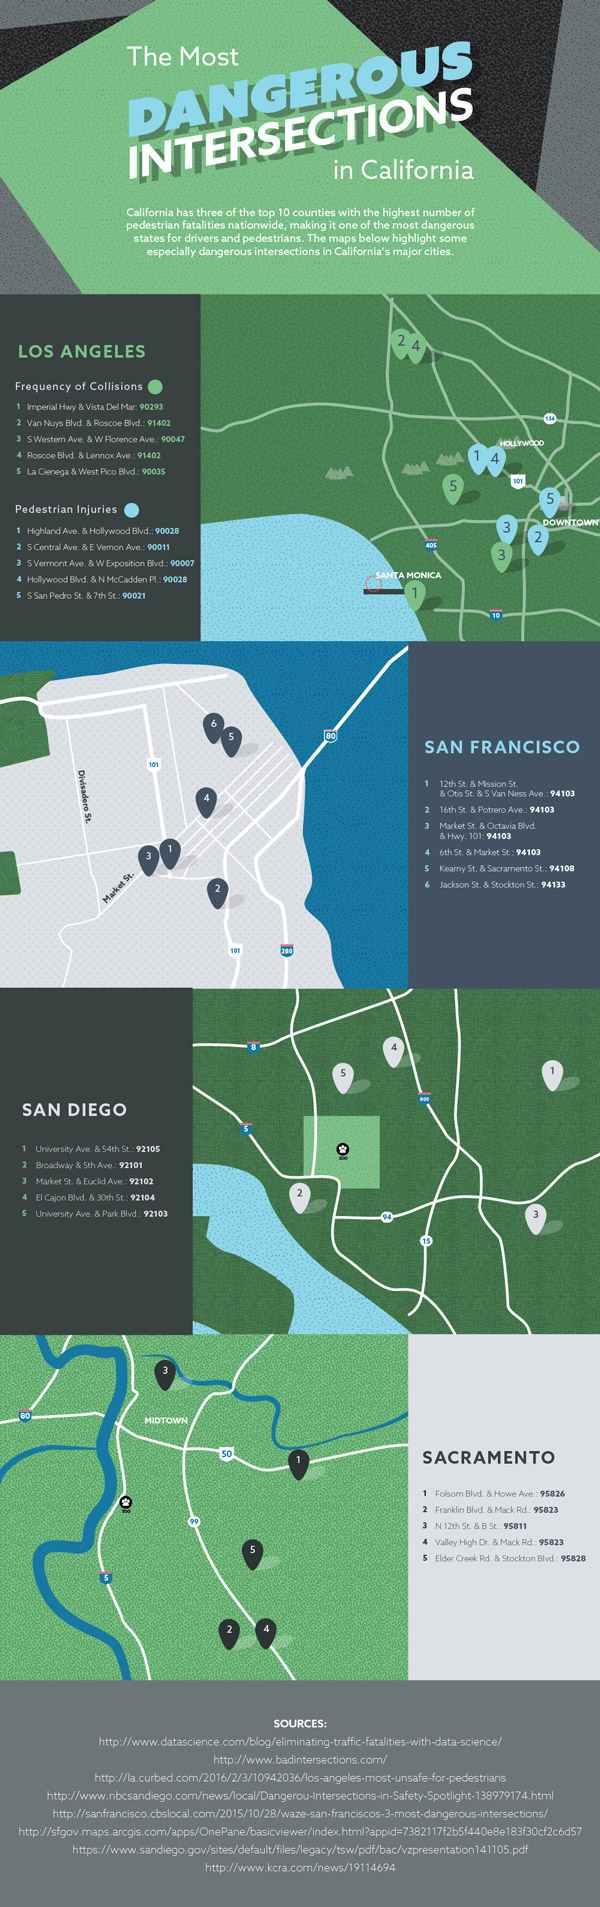 Dangerous Intersections in CA Infographic